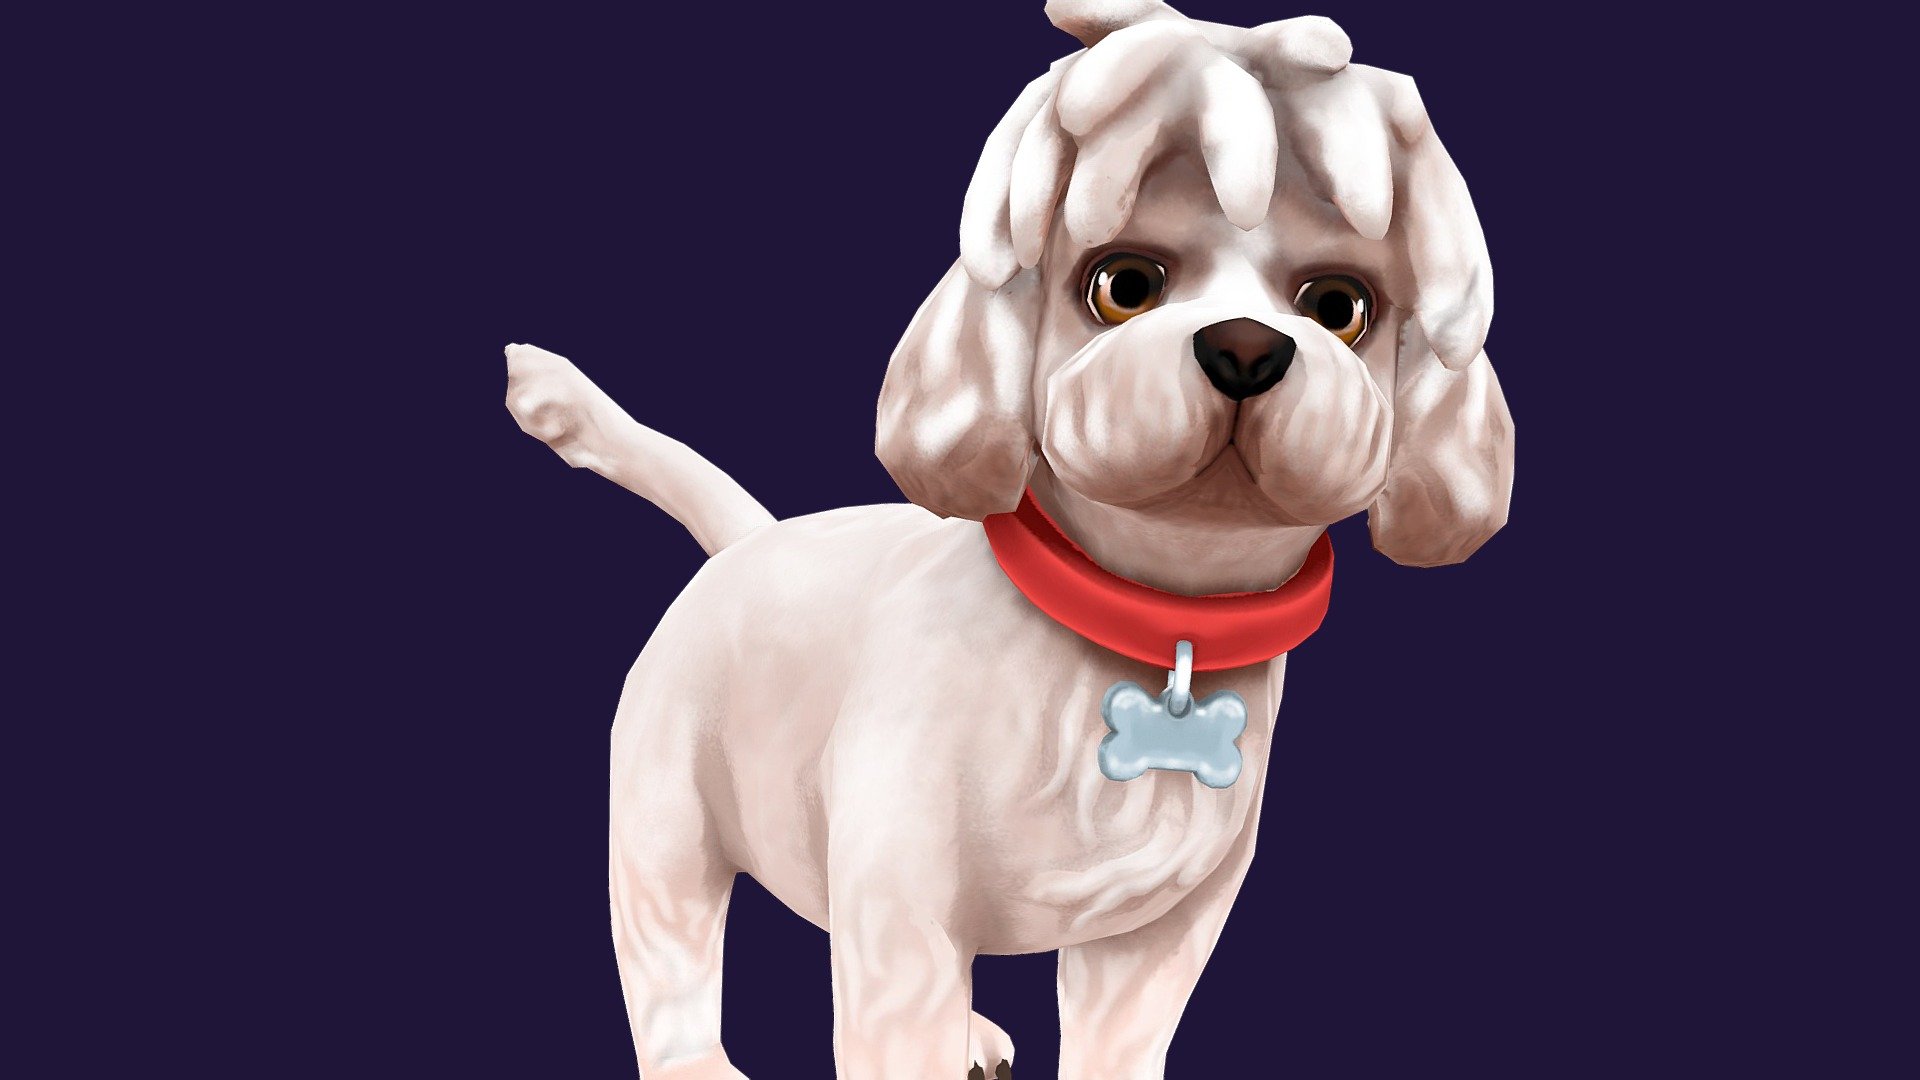 I 3D modeled and textured my dog just for fun, her name is Pelusa. Hope you like it 3d model